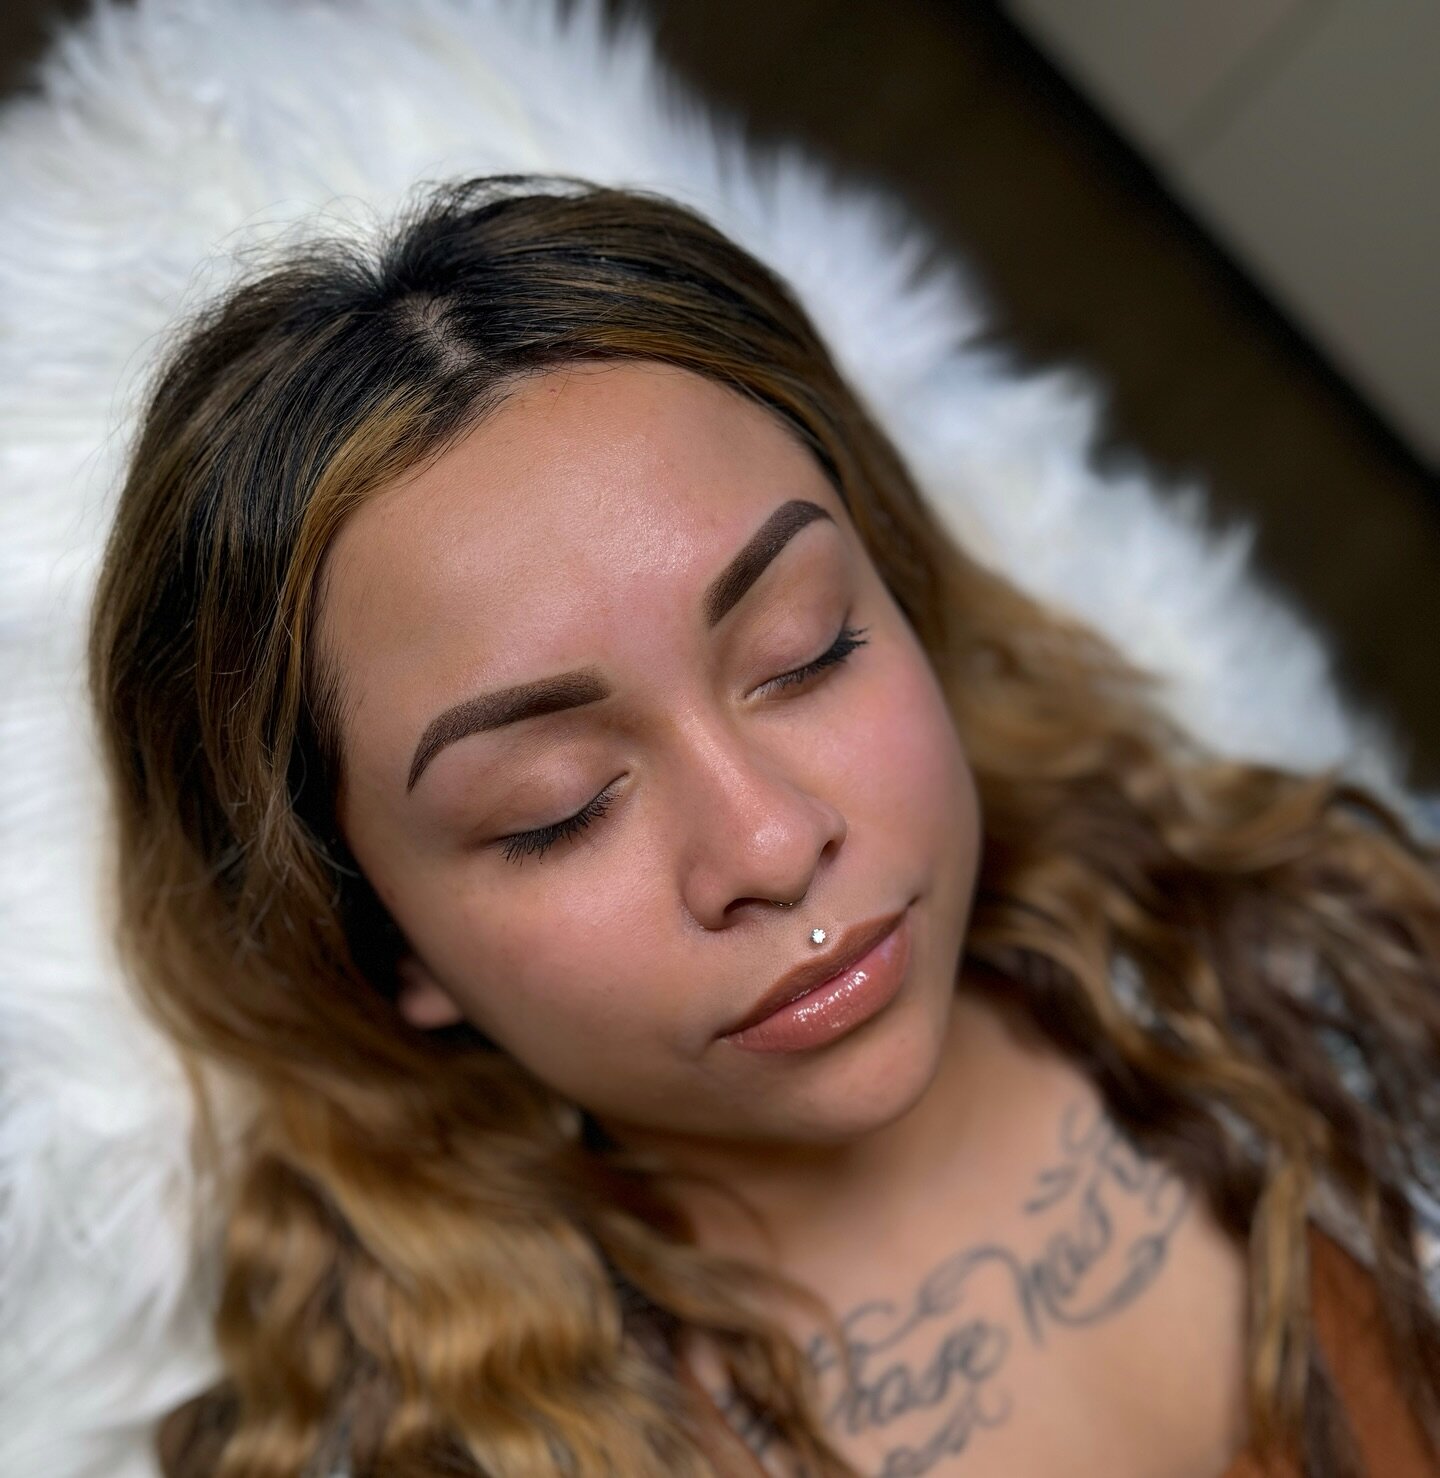 Brows as timeless as the holiday spirit &ndash; ready to slay for the next 2-3 years! ✨We did ombr&eacute; powder brows for this look. Schedule your appointment at www.cascadia-ink.com. 

#puyallupbrows #puyallupsalon #seattleombrebrows #seattlemicro